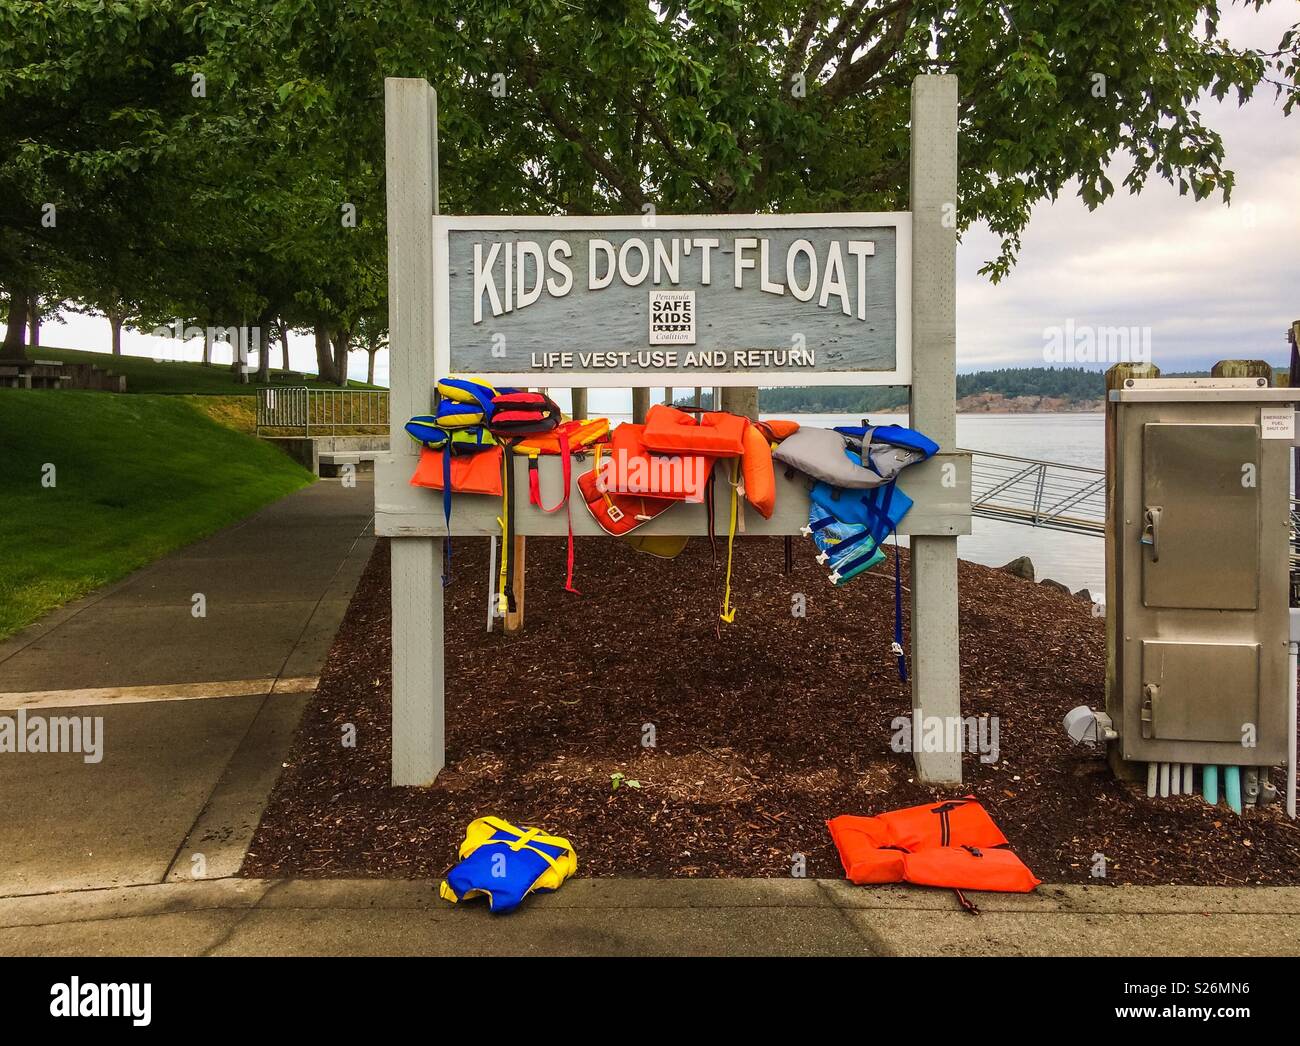 Kids don’t float. Free life vests for kids use in the marina of Sequim, Olympic Peninsula, Washington State, USA. Stock Photo